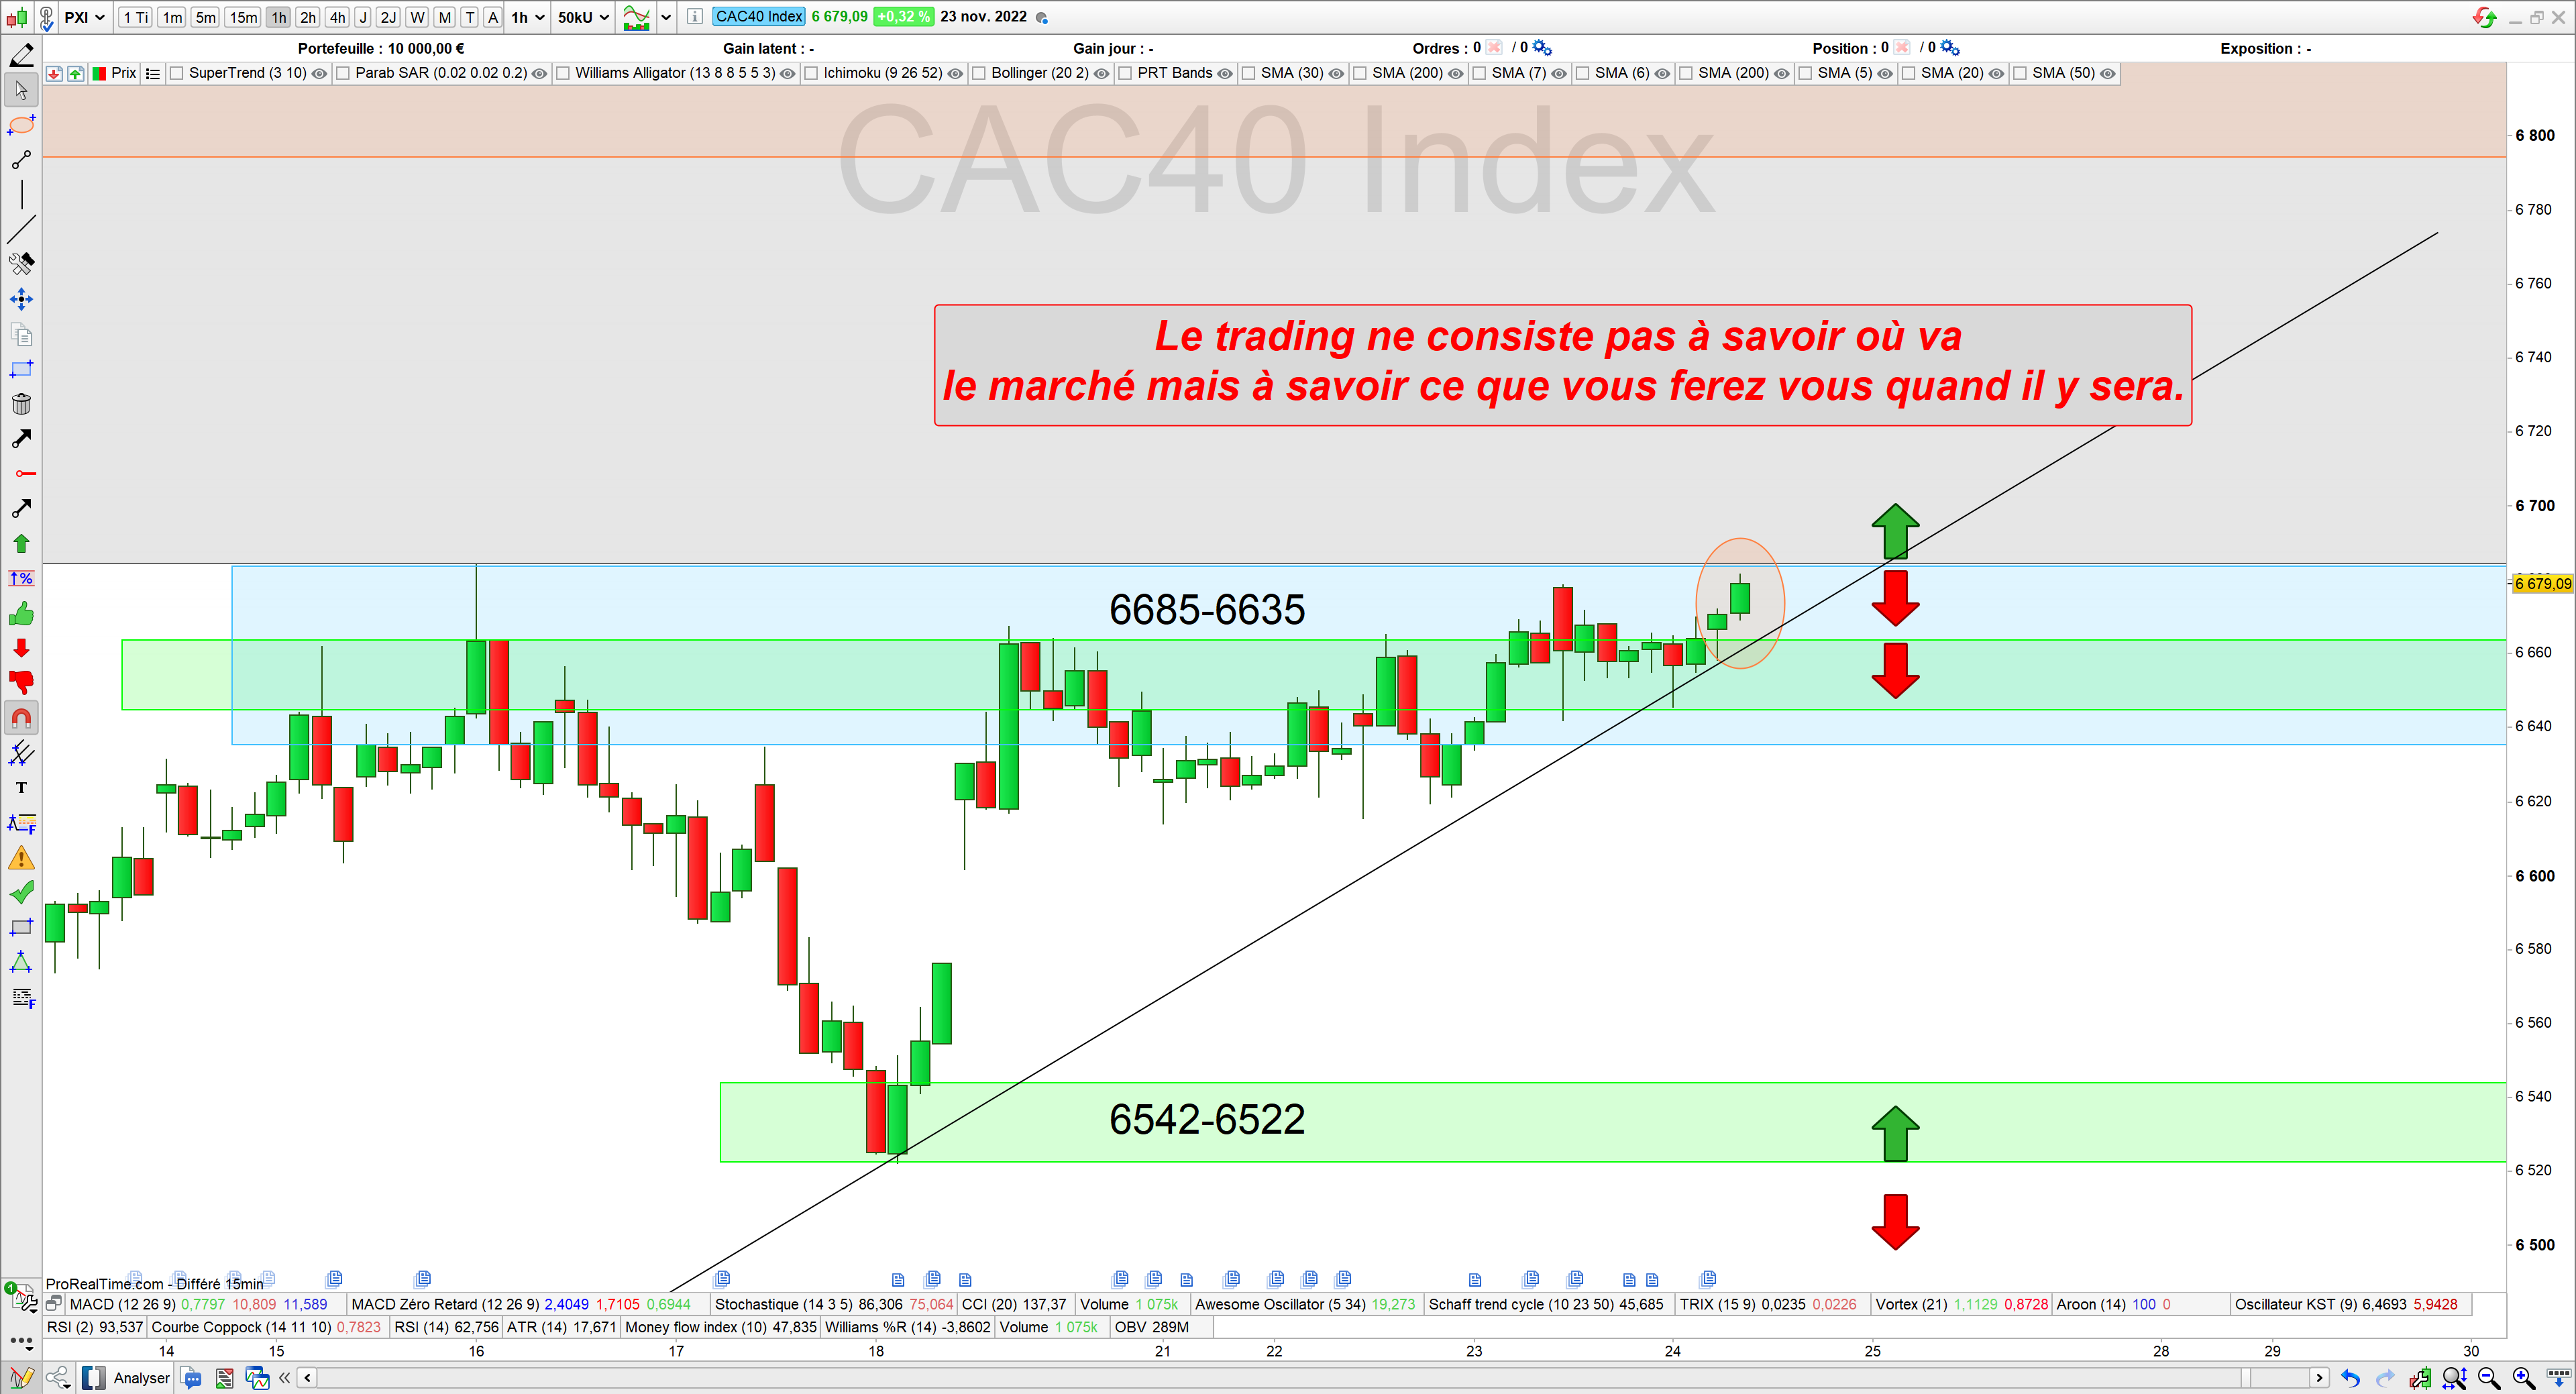 Trading cac40 25/11/22